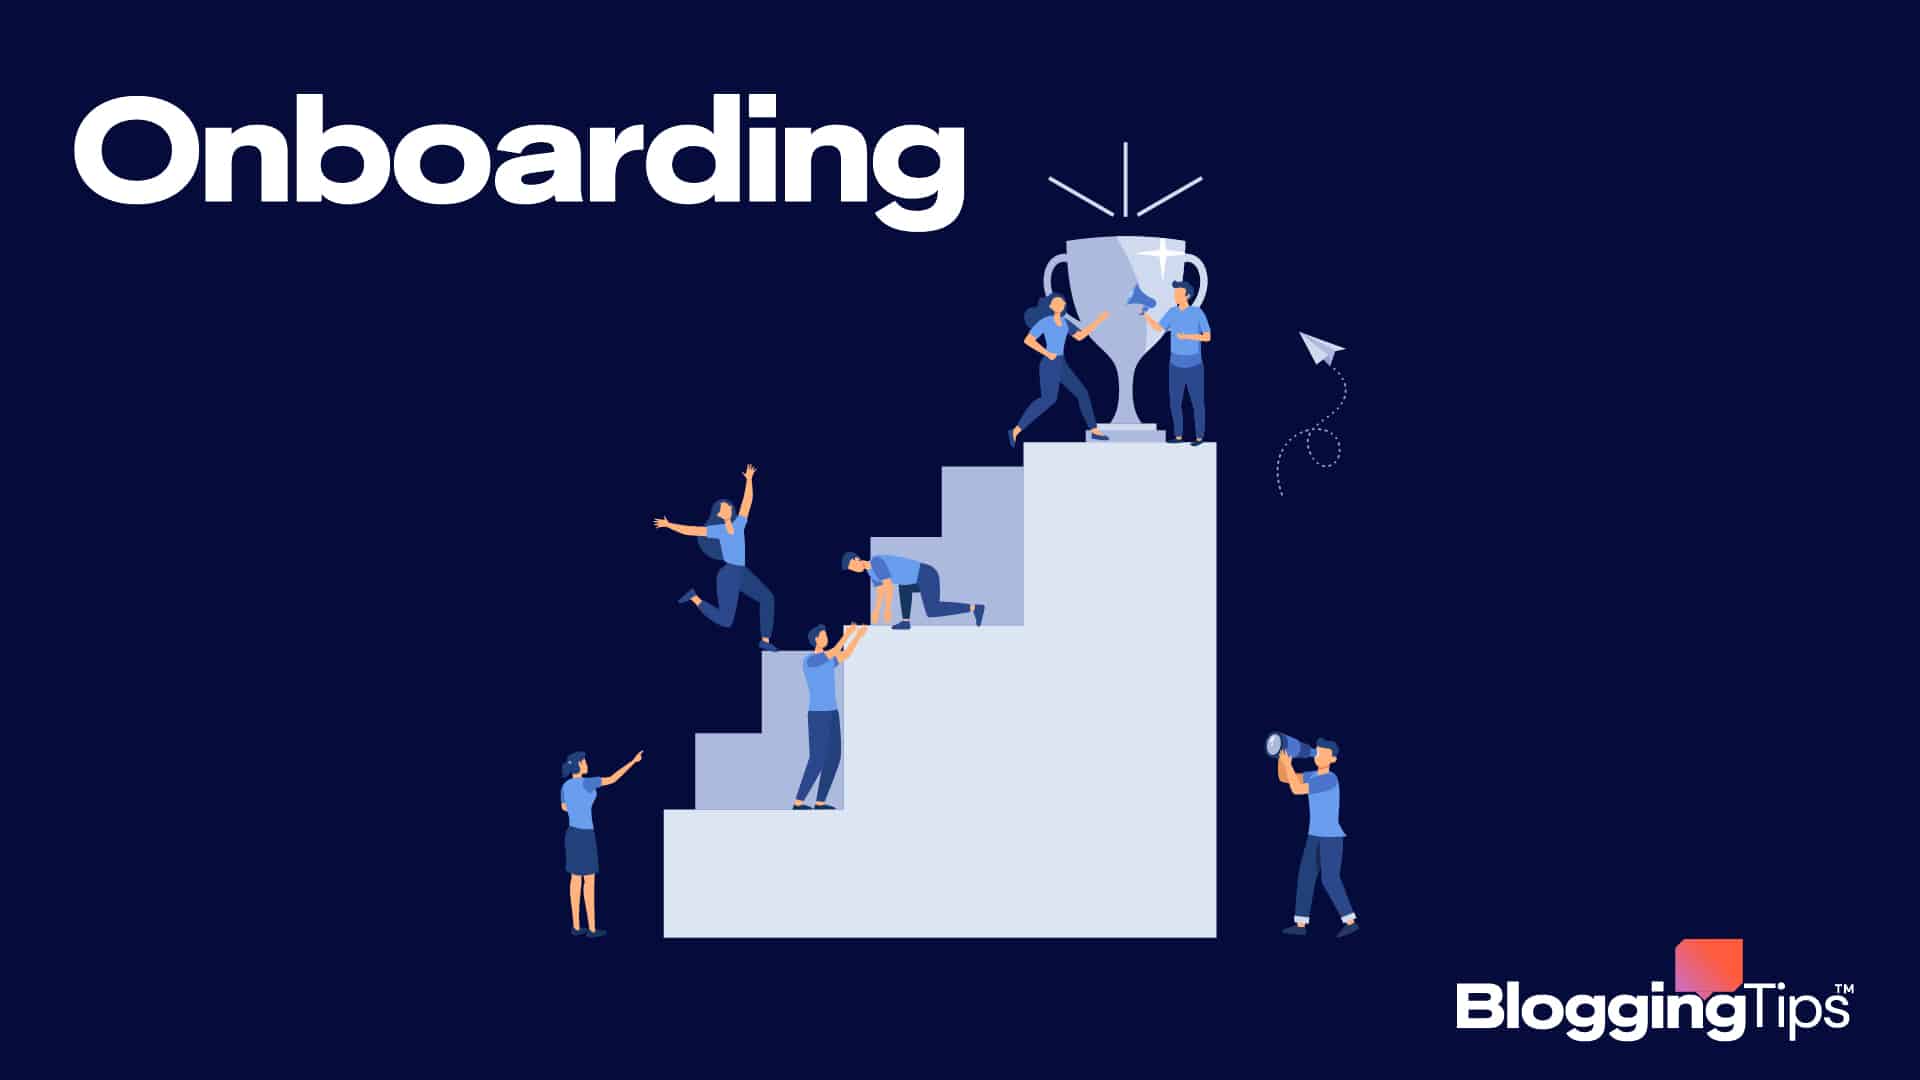 vector graphic showing an illustration of onboarding employees by using onboarding software